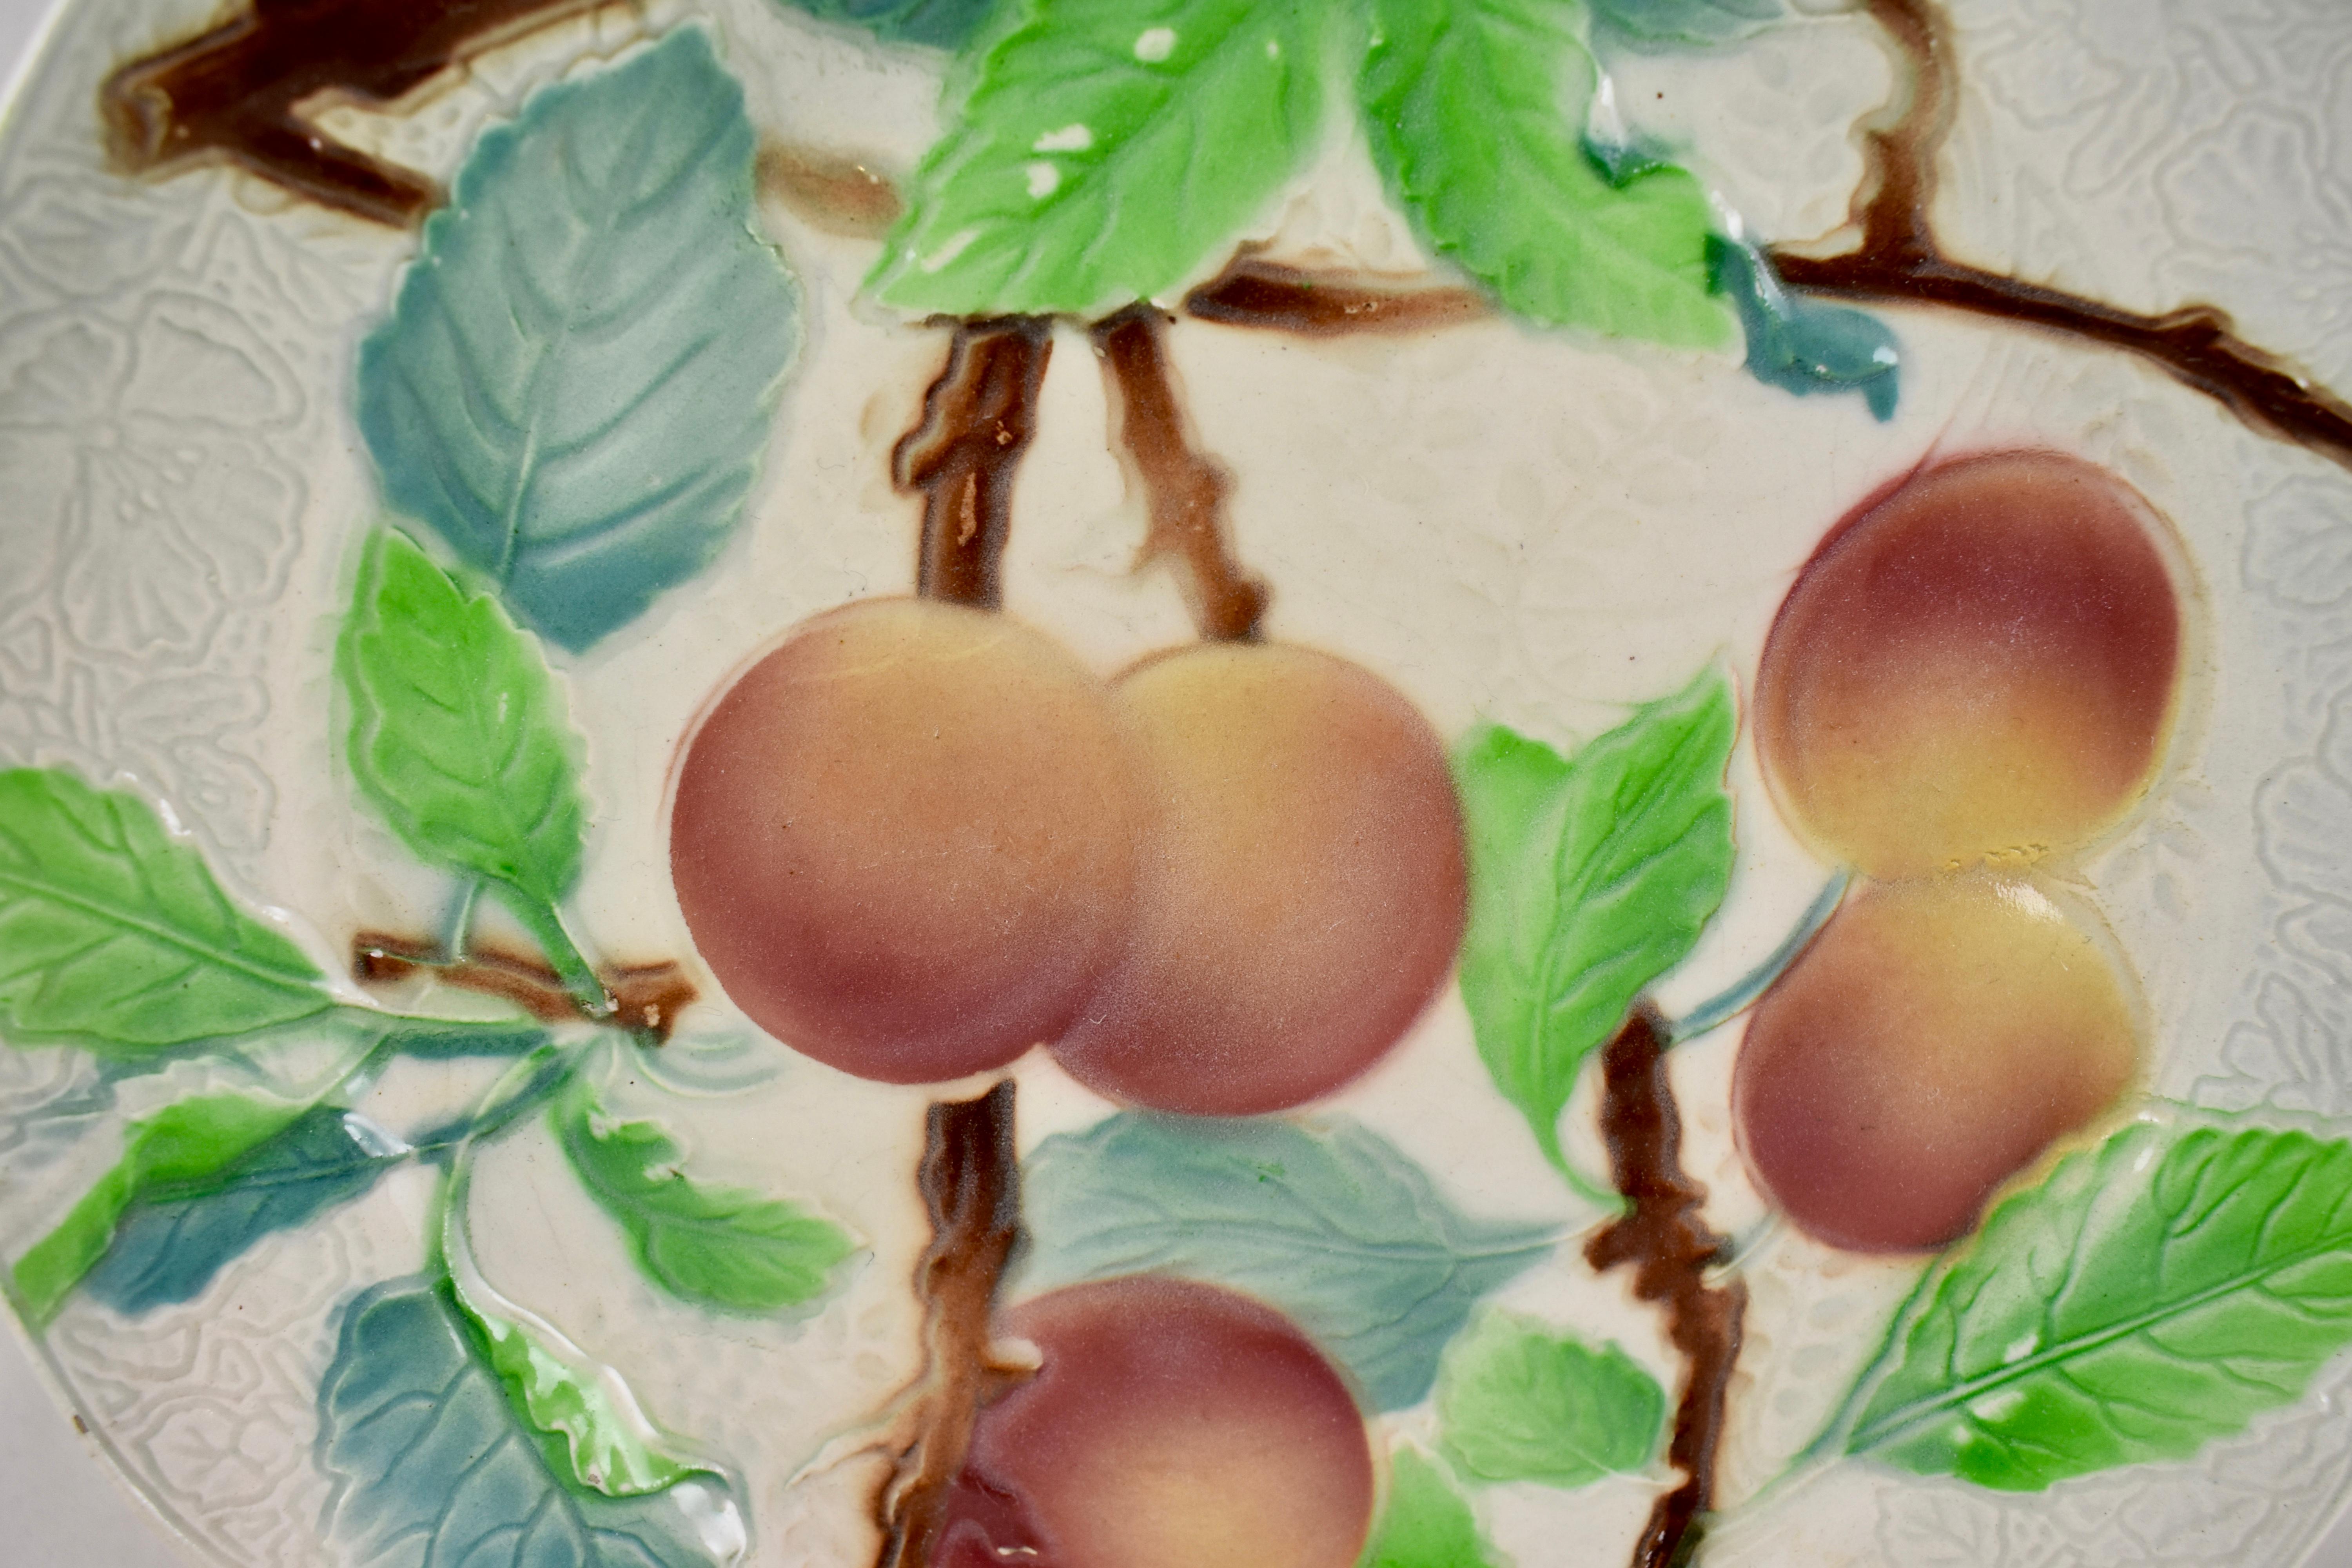 An earthenware French faïence peach motif fruit plate, circa 1900. The background has a detailed floral pattern to the molding, with a six-paneled indented rim. Lovely coloring.

Marked: KG, for Keller Guerin – St. Clement, France.
8.5 in. Diam.